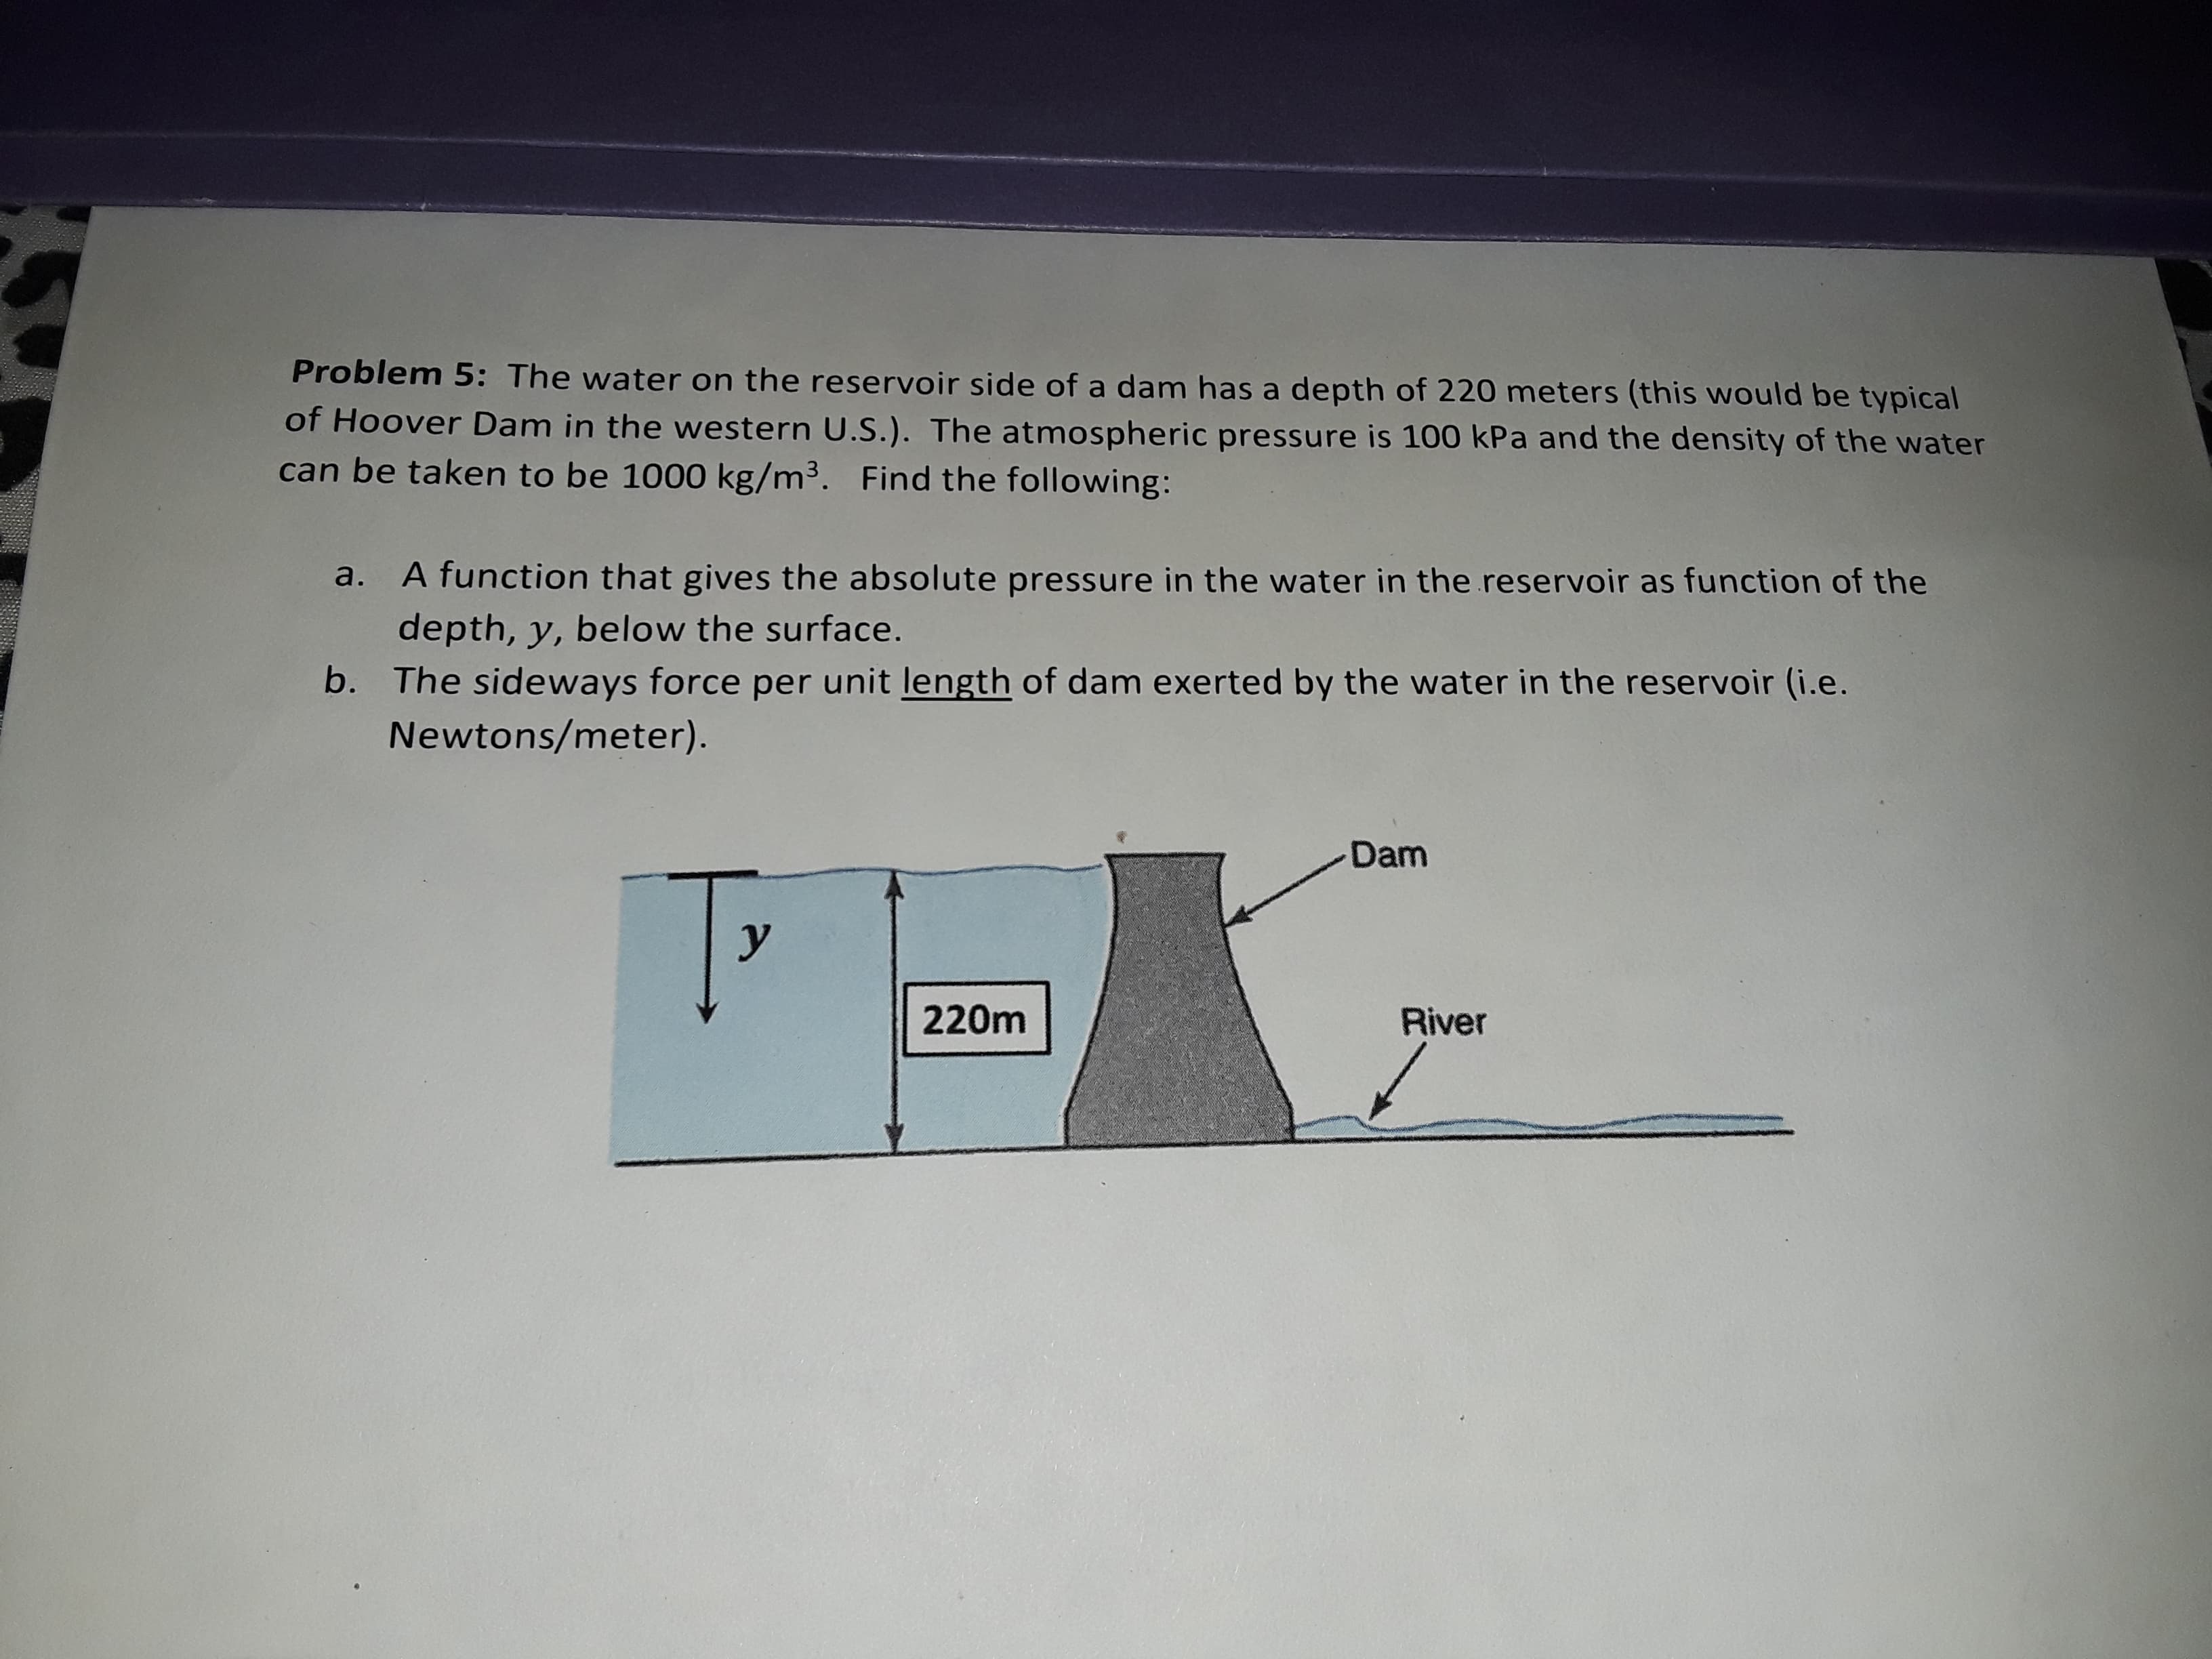 Problem 5: The water on the reservoir side of a dam has a depth of 220 meters (this would be typical
of Hoover Dam in the weste rn U.S.). The atmospheric pressure is 100 kPa and the density of the water
can be taken to be 1000 kg/m3. Find the following:
A function that gives the absolute pressure in the water in the reservoir as function of the
a.
depth, y, below the surface.
b. The sideways force per unit length of dam exerted by the water in the reservoir (i.e.
Newtons/meter).
Dam
у
220m
River
